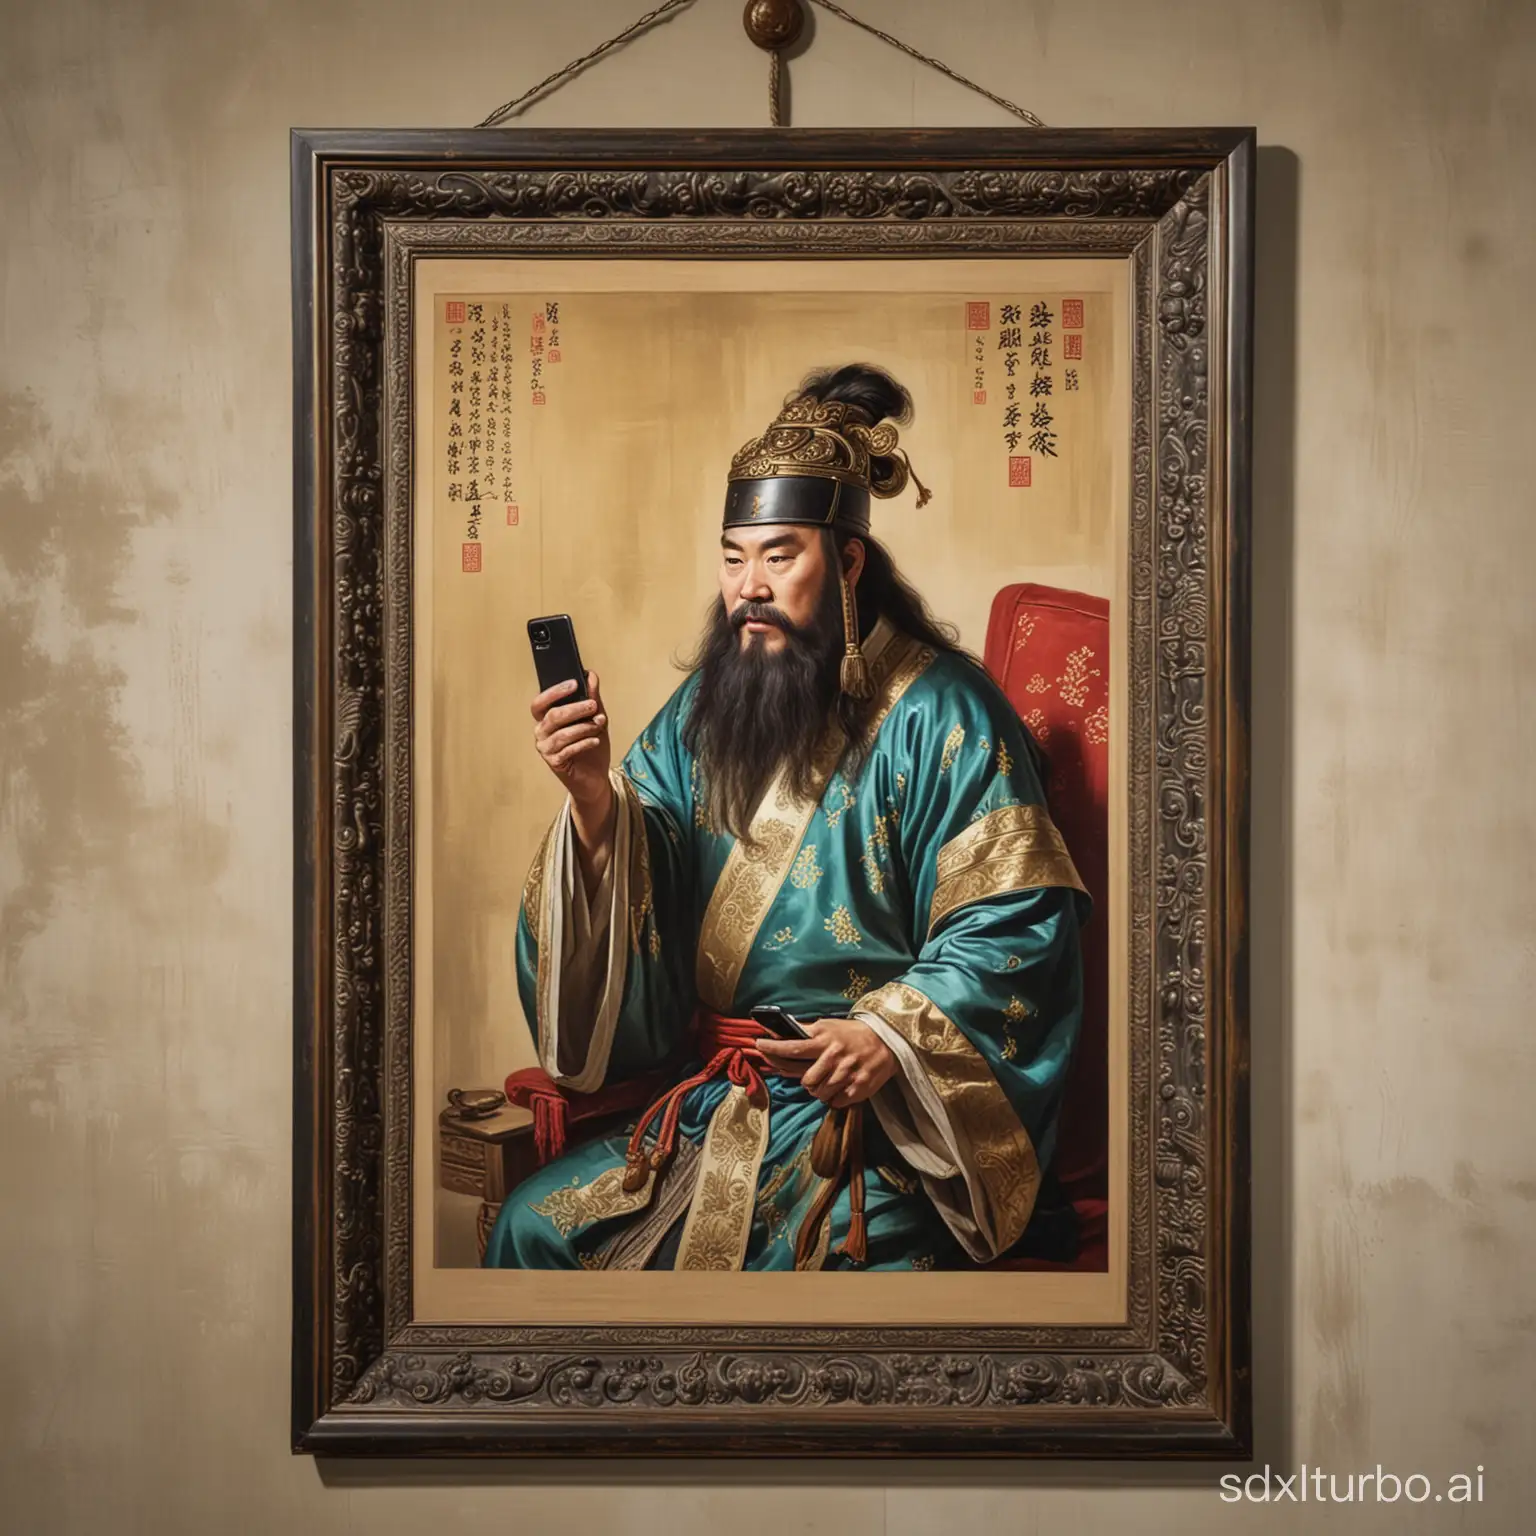 Guan-Gong-Admiring-Modern-Communication-Traditional-Warrior-Engages-with-Technology